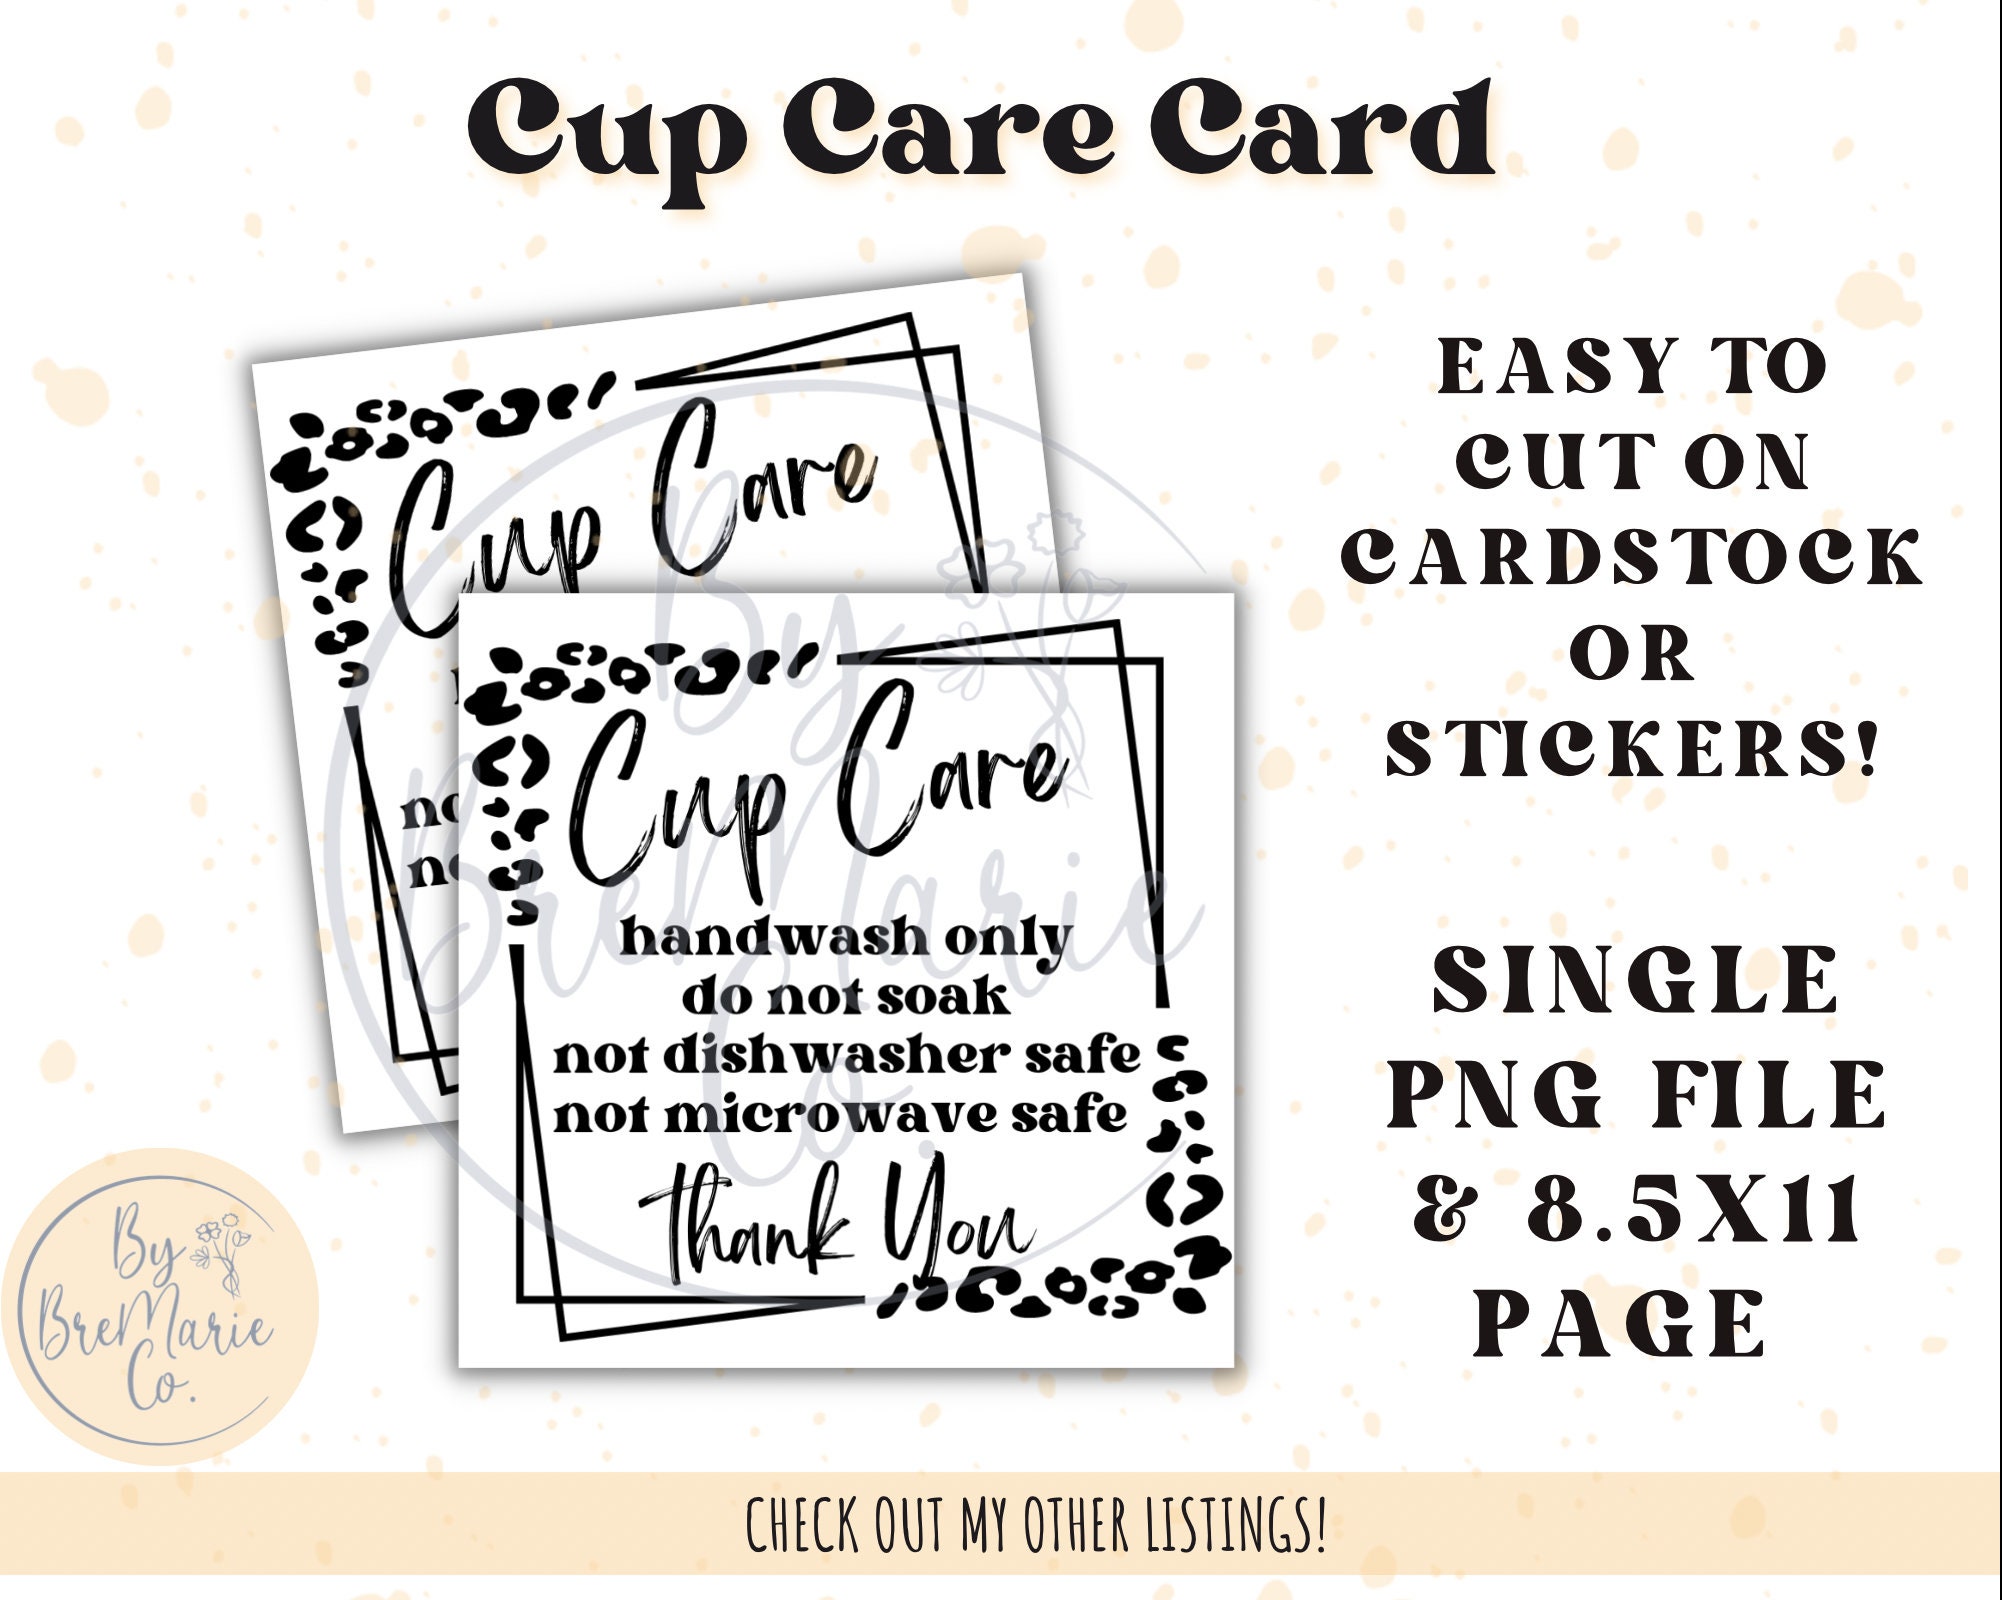 Premium Glossy Cardstock Care Cards – OMG Cups!